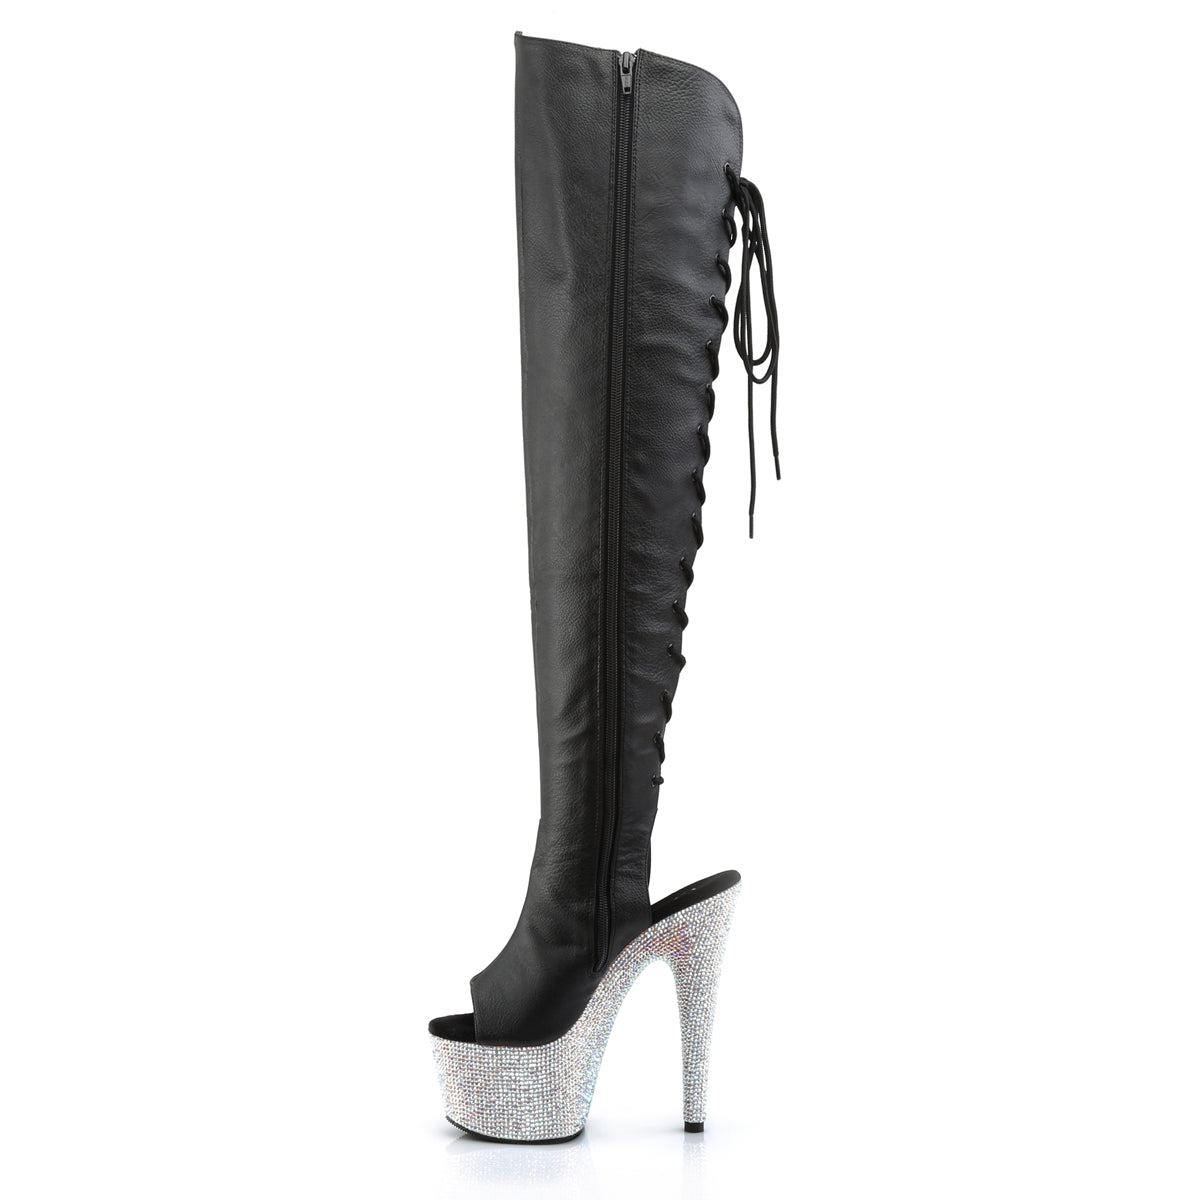 BEJEWELED-3019DM-7 7 Inch Heel Black Bling Strippers Boots-Pleaser- Sexy Shoes Pole Dance Heels